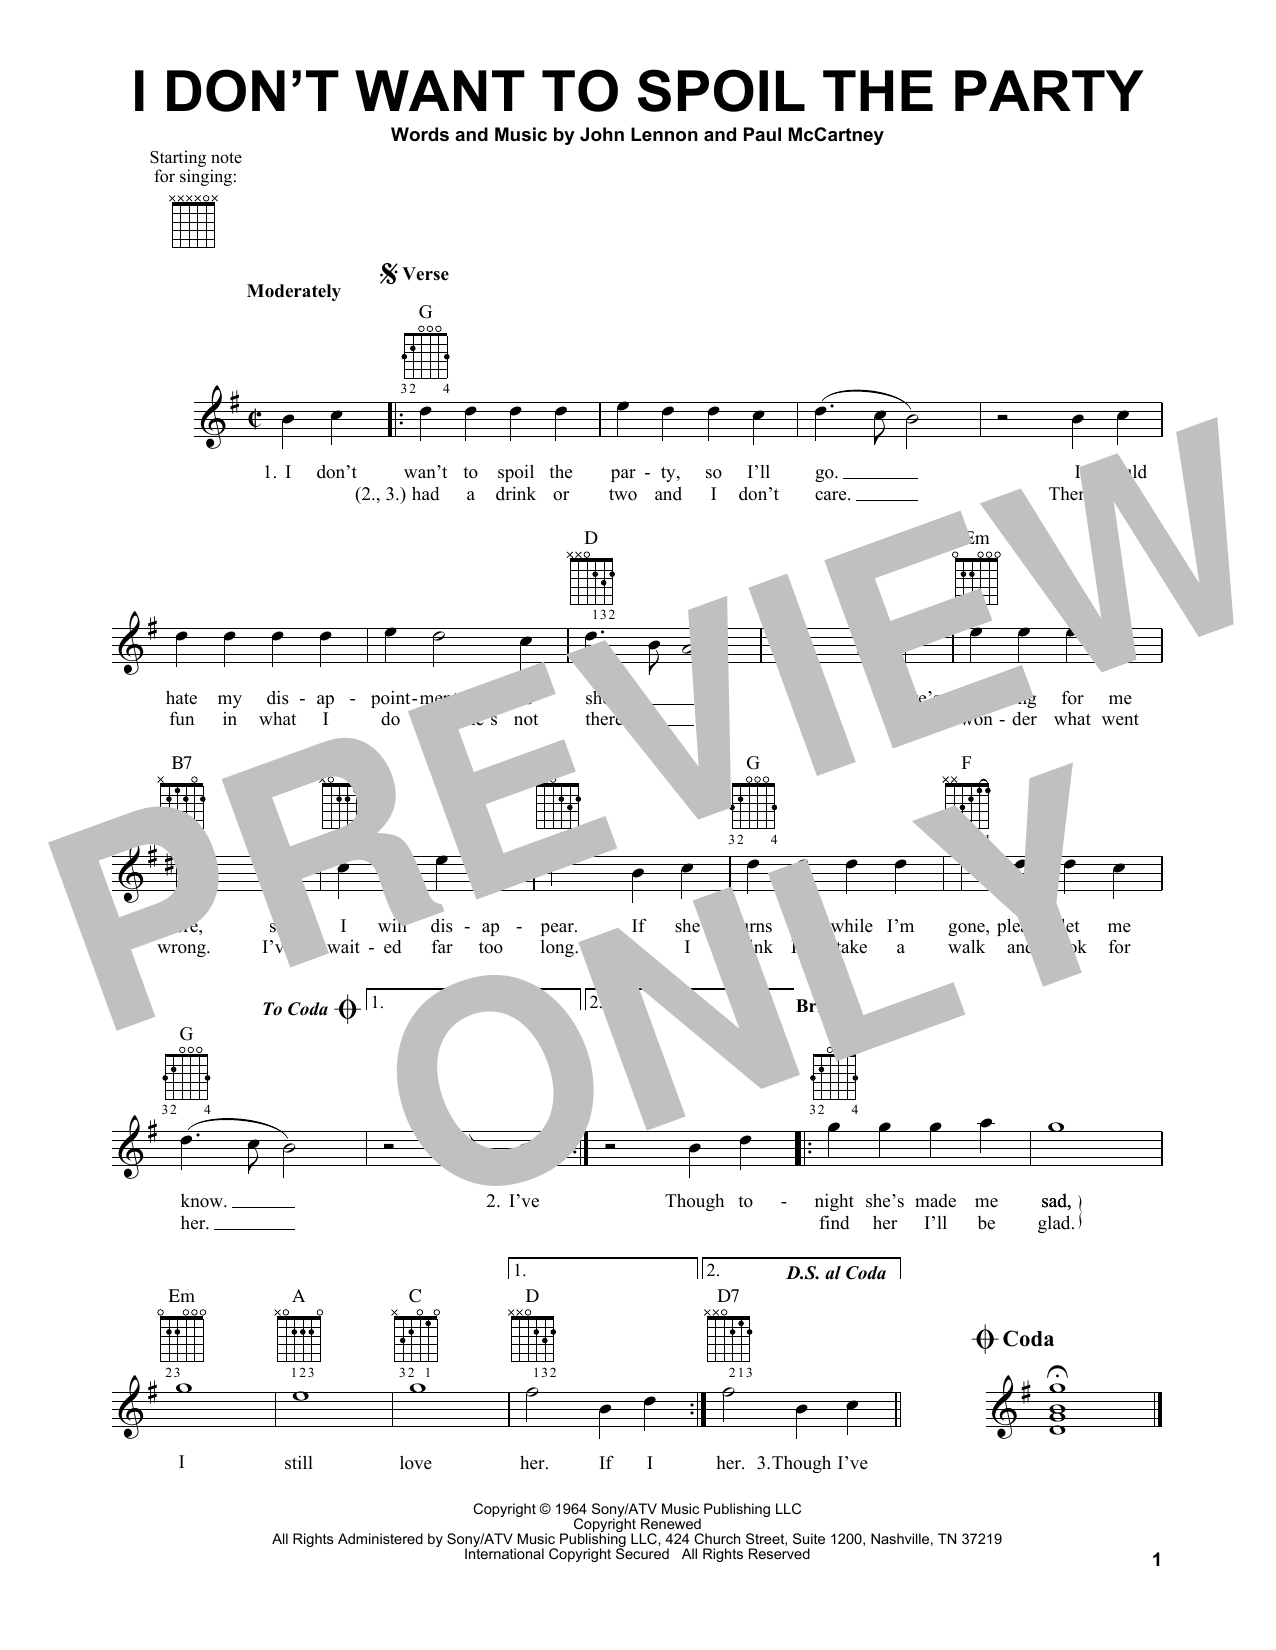 Download The Beatles I Don't Want To Spoil The Party Sheet Music